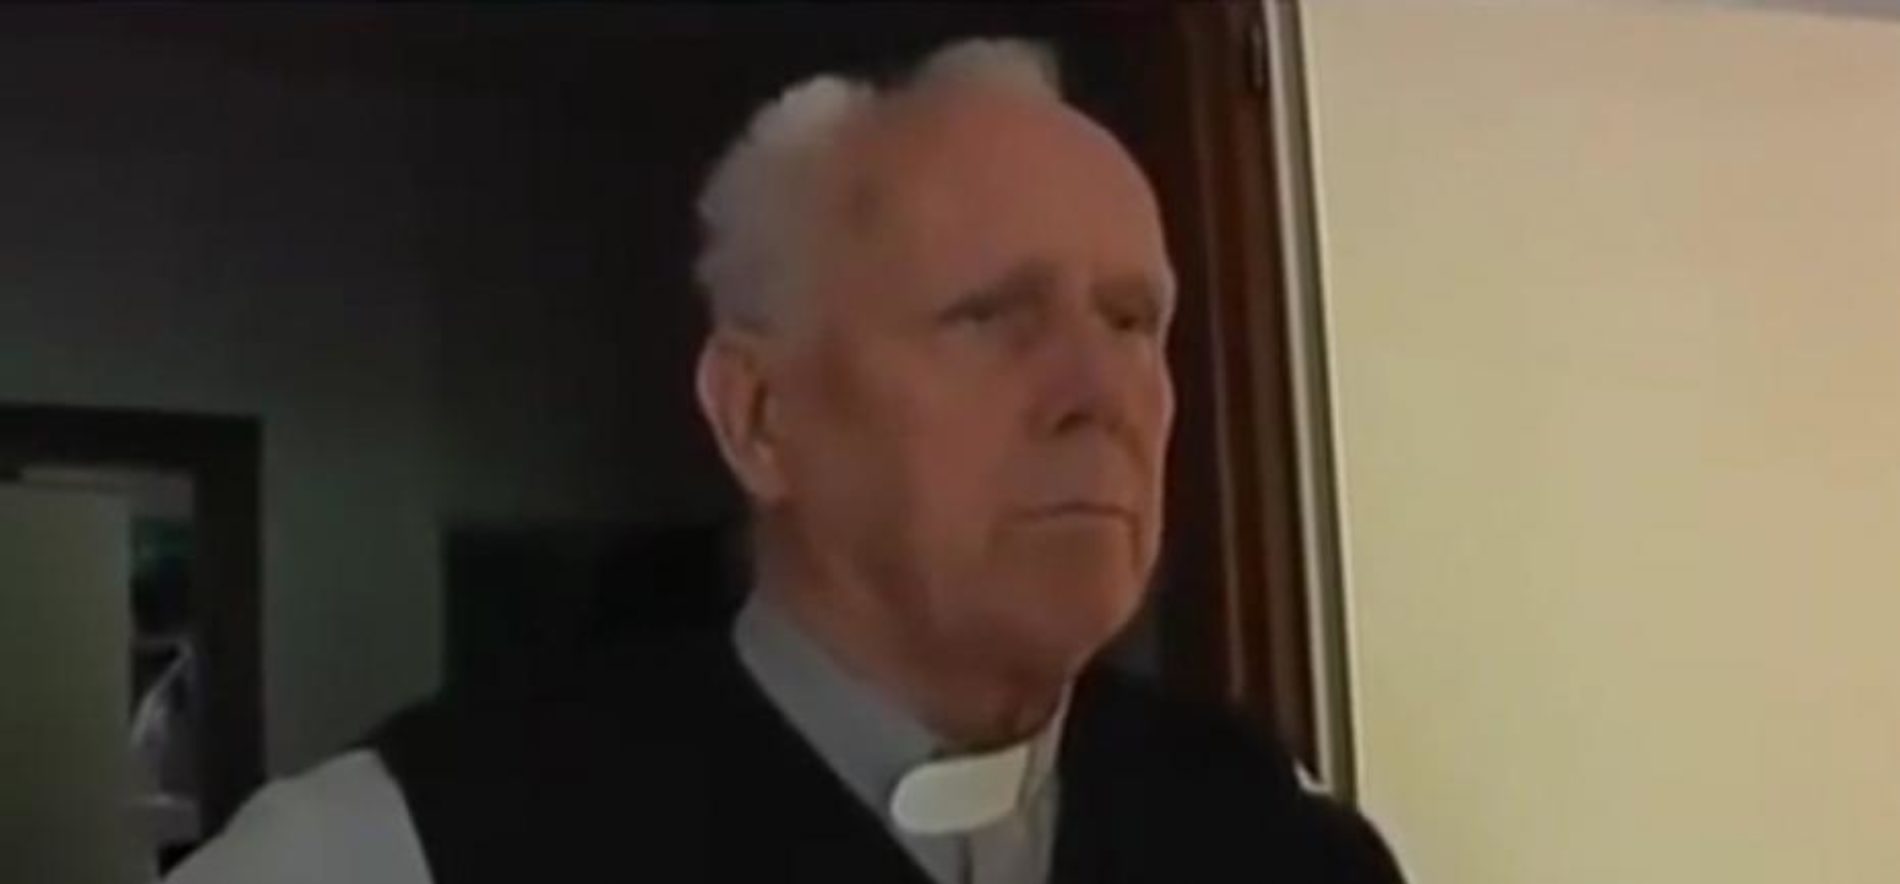 Priest says he ‘understands paedophilia’ but thinks ‘homosexuality is unacceptable’